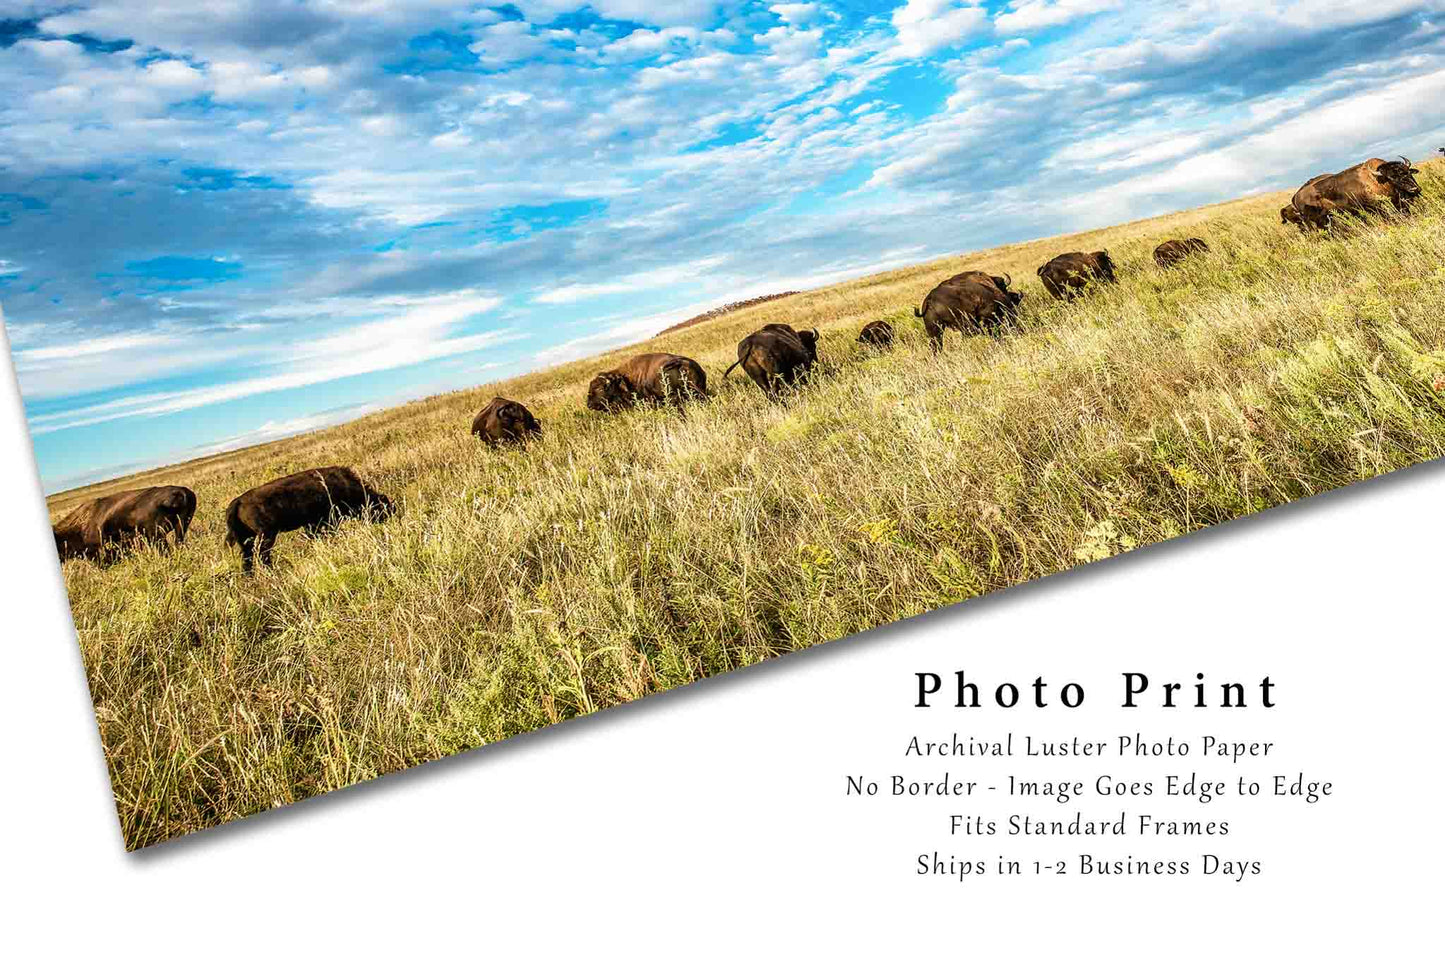 Bison Photography Print (Not Framed) Picture of Buffalo Herd on Tallgrass Prairie in Oklahoma Great Plains Wall Art Western Decor